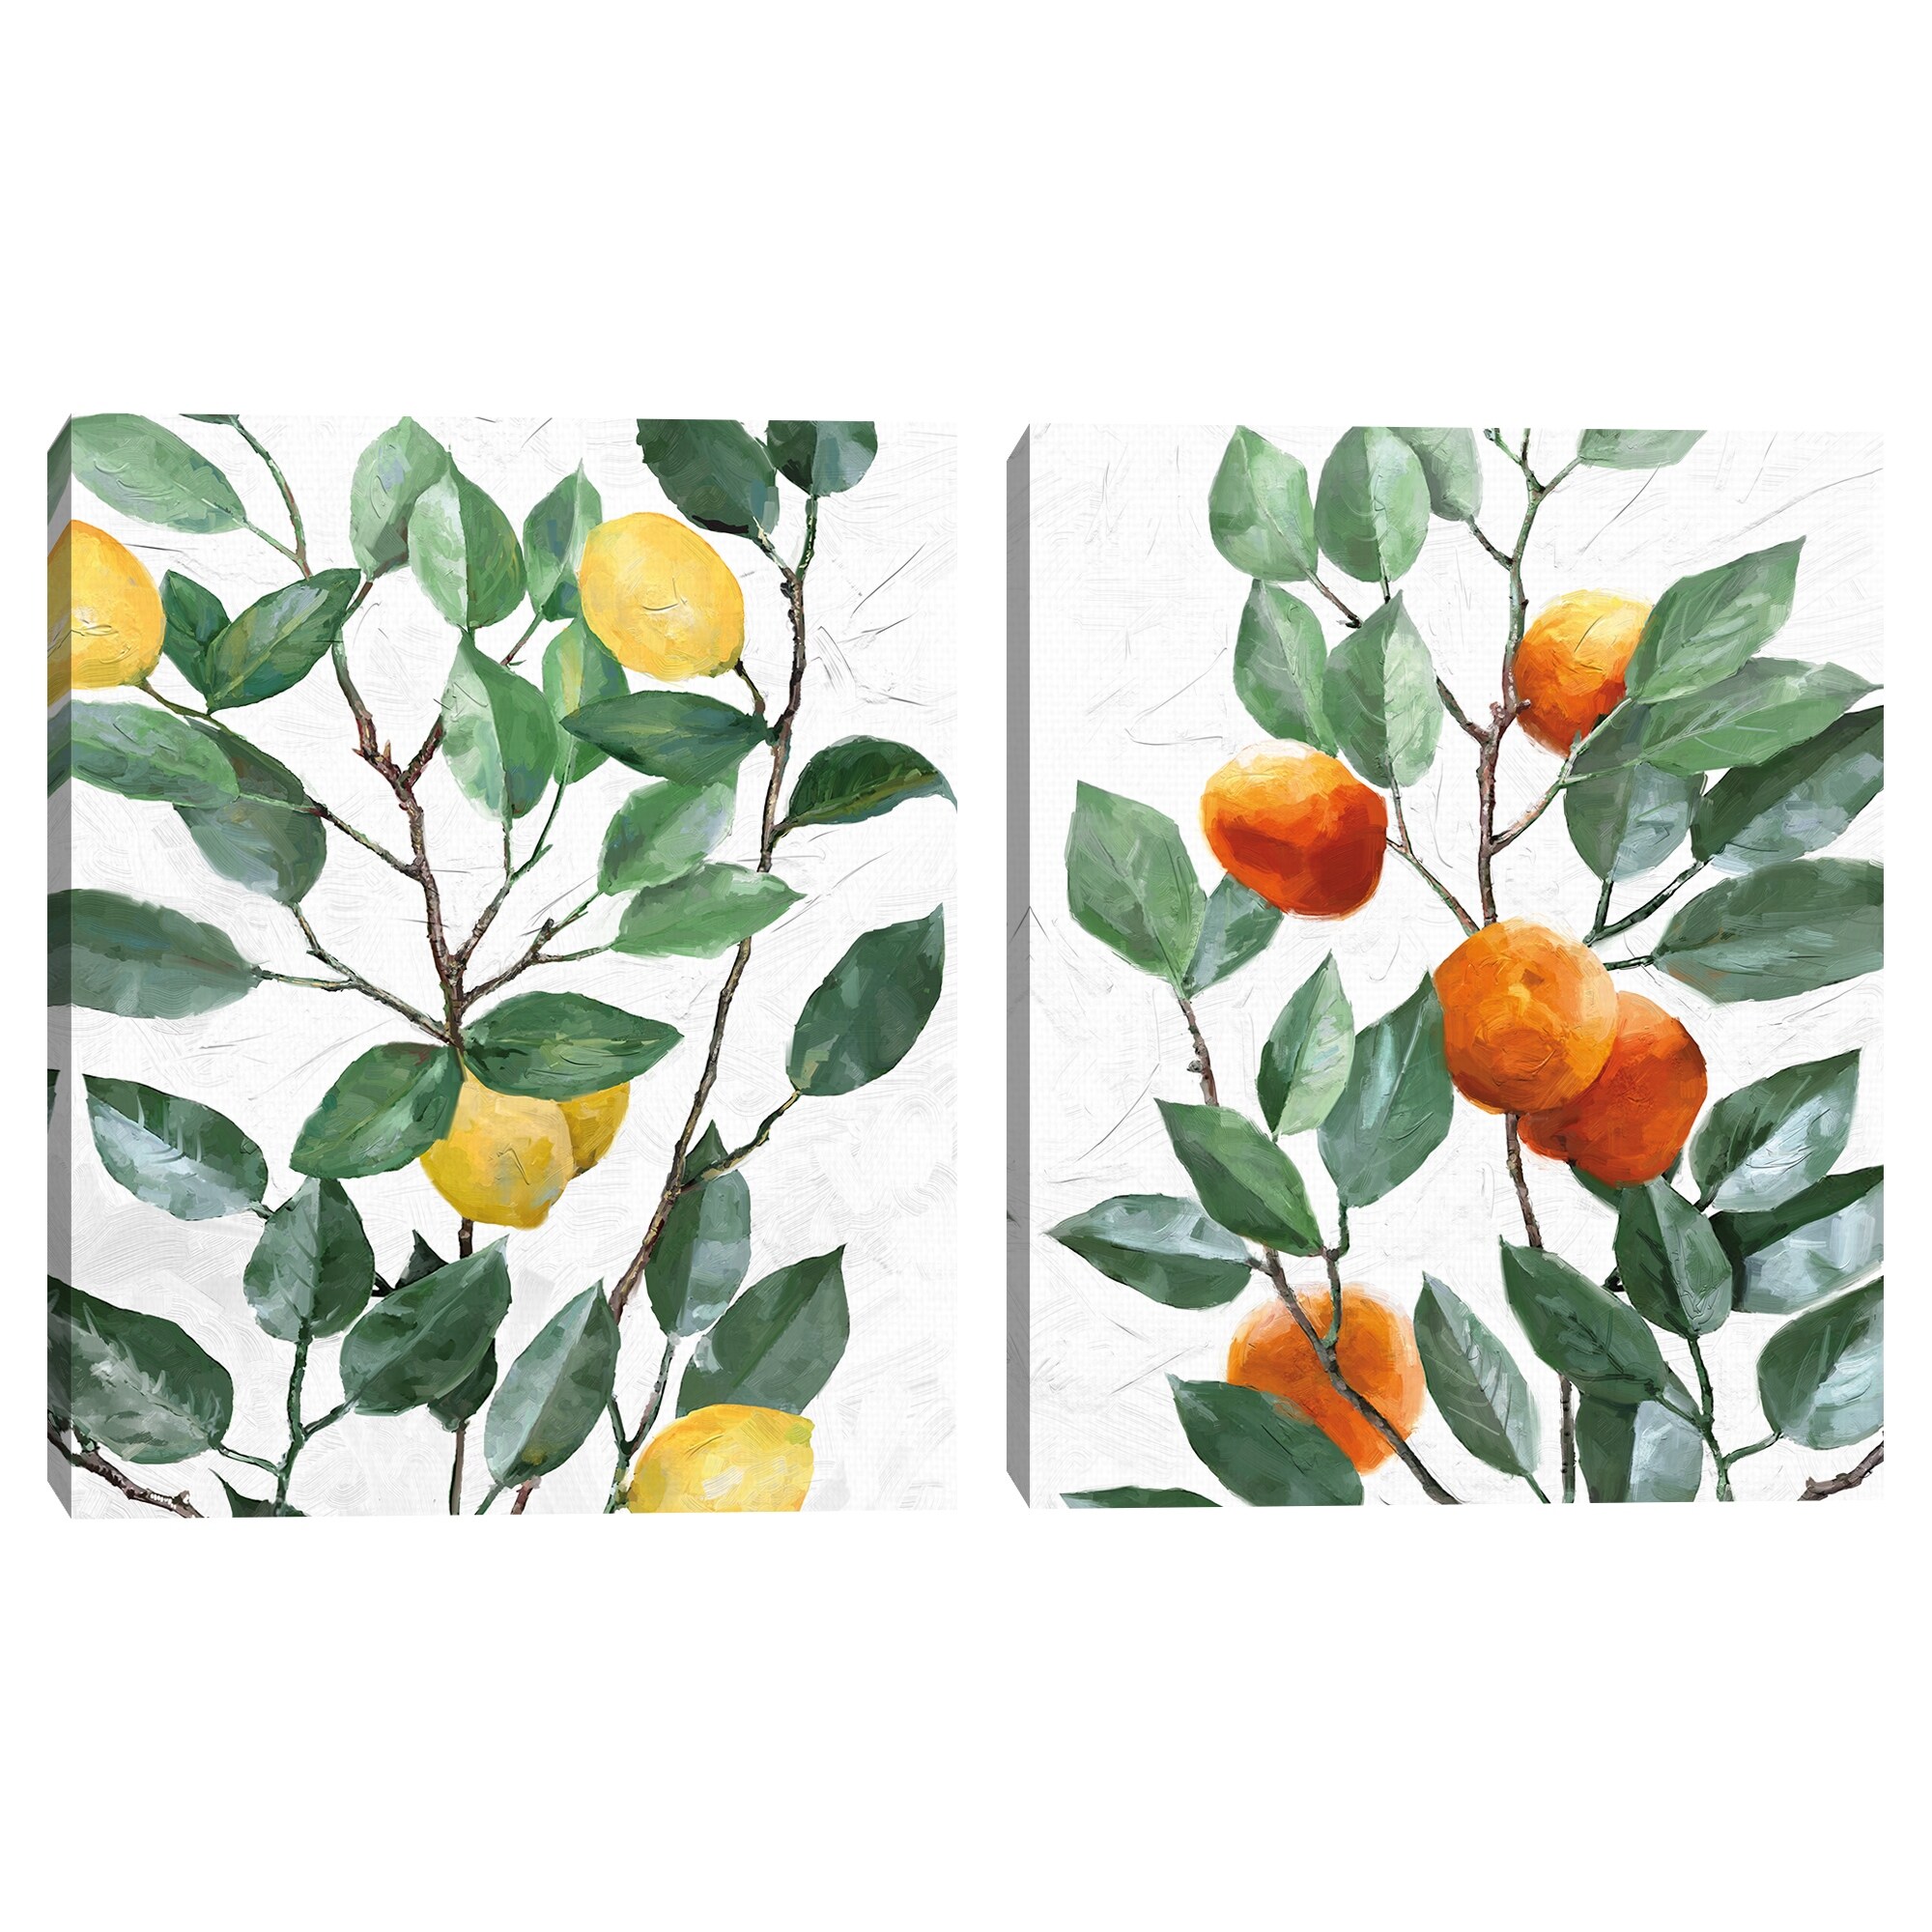 https://ak1.ostkcdn.com/images/products/is/images/direct/cc028c4607b8b7ecb135c9ab407e6cd15eb1a1e8/Lemon-%26-Tangerine-Tree-by-Studio-Arts-Set-of-2-Canvas-Art-Prints.jpg